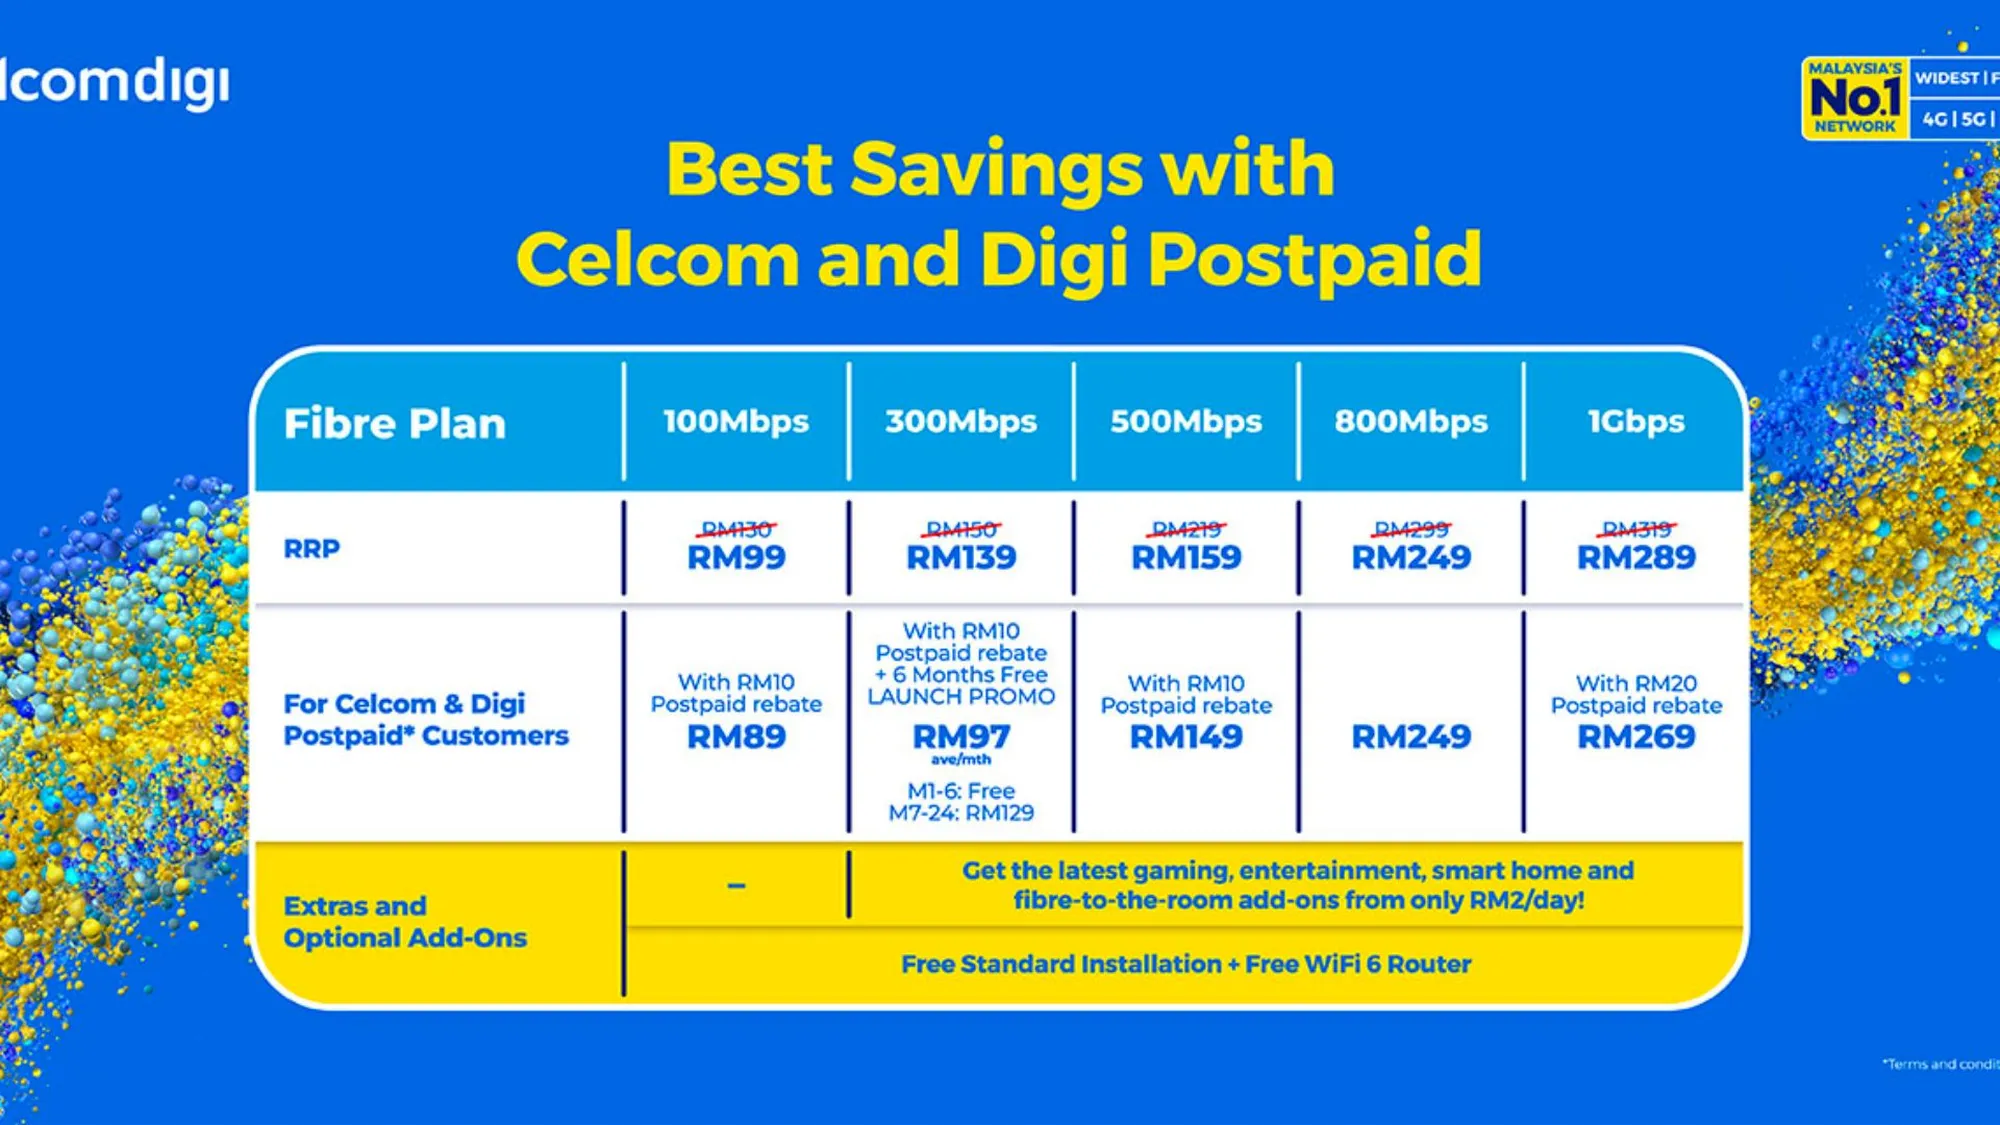 celcomdigi announces new broadband plans with lower prices and higher speeds